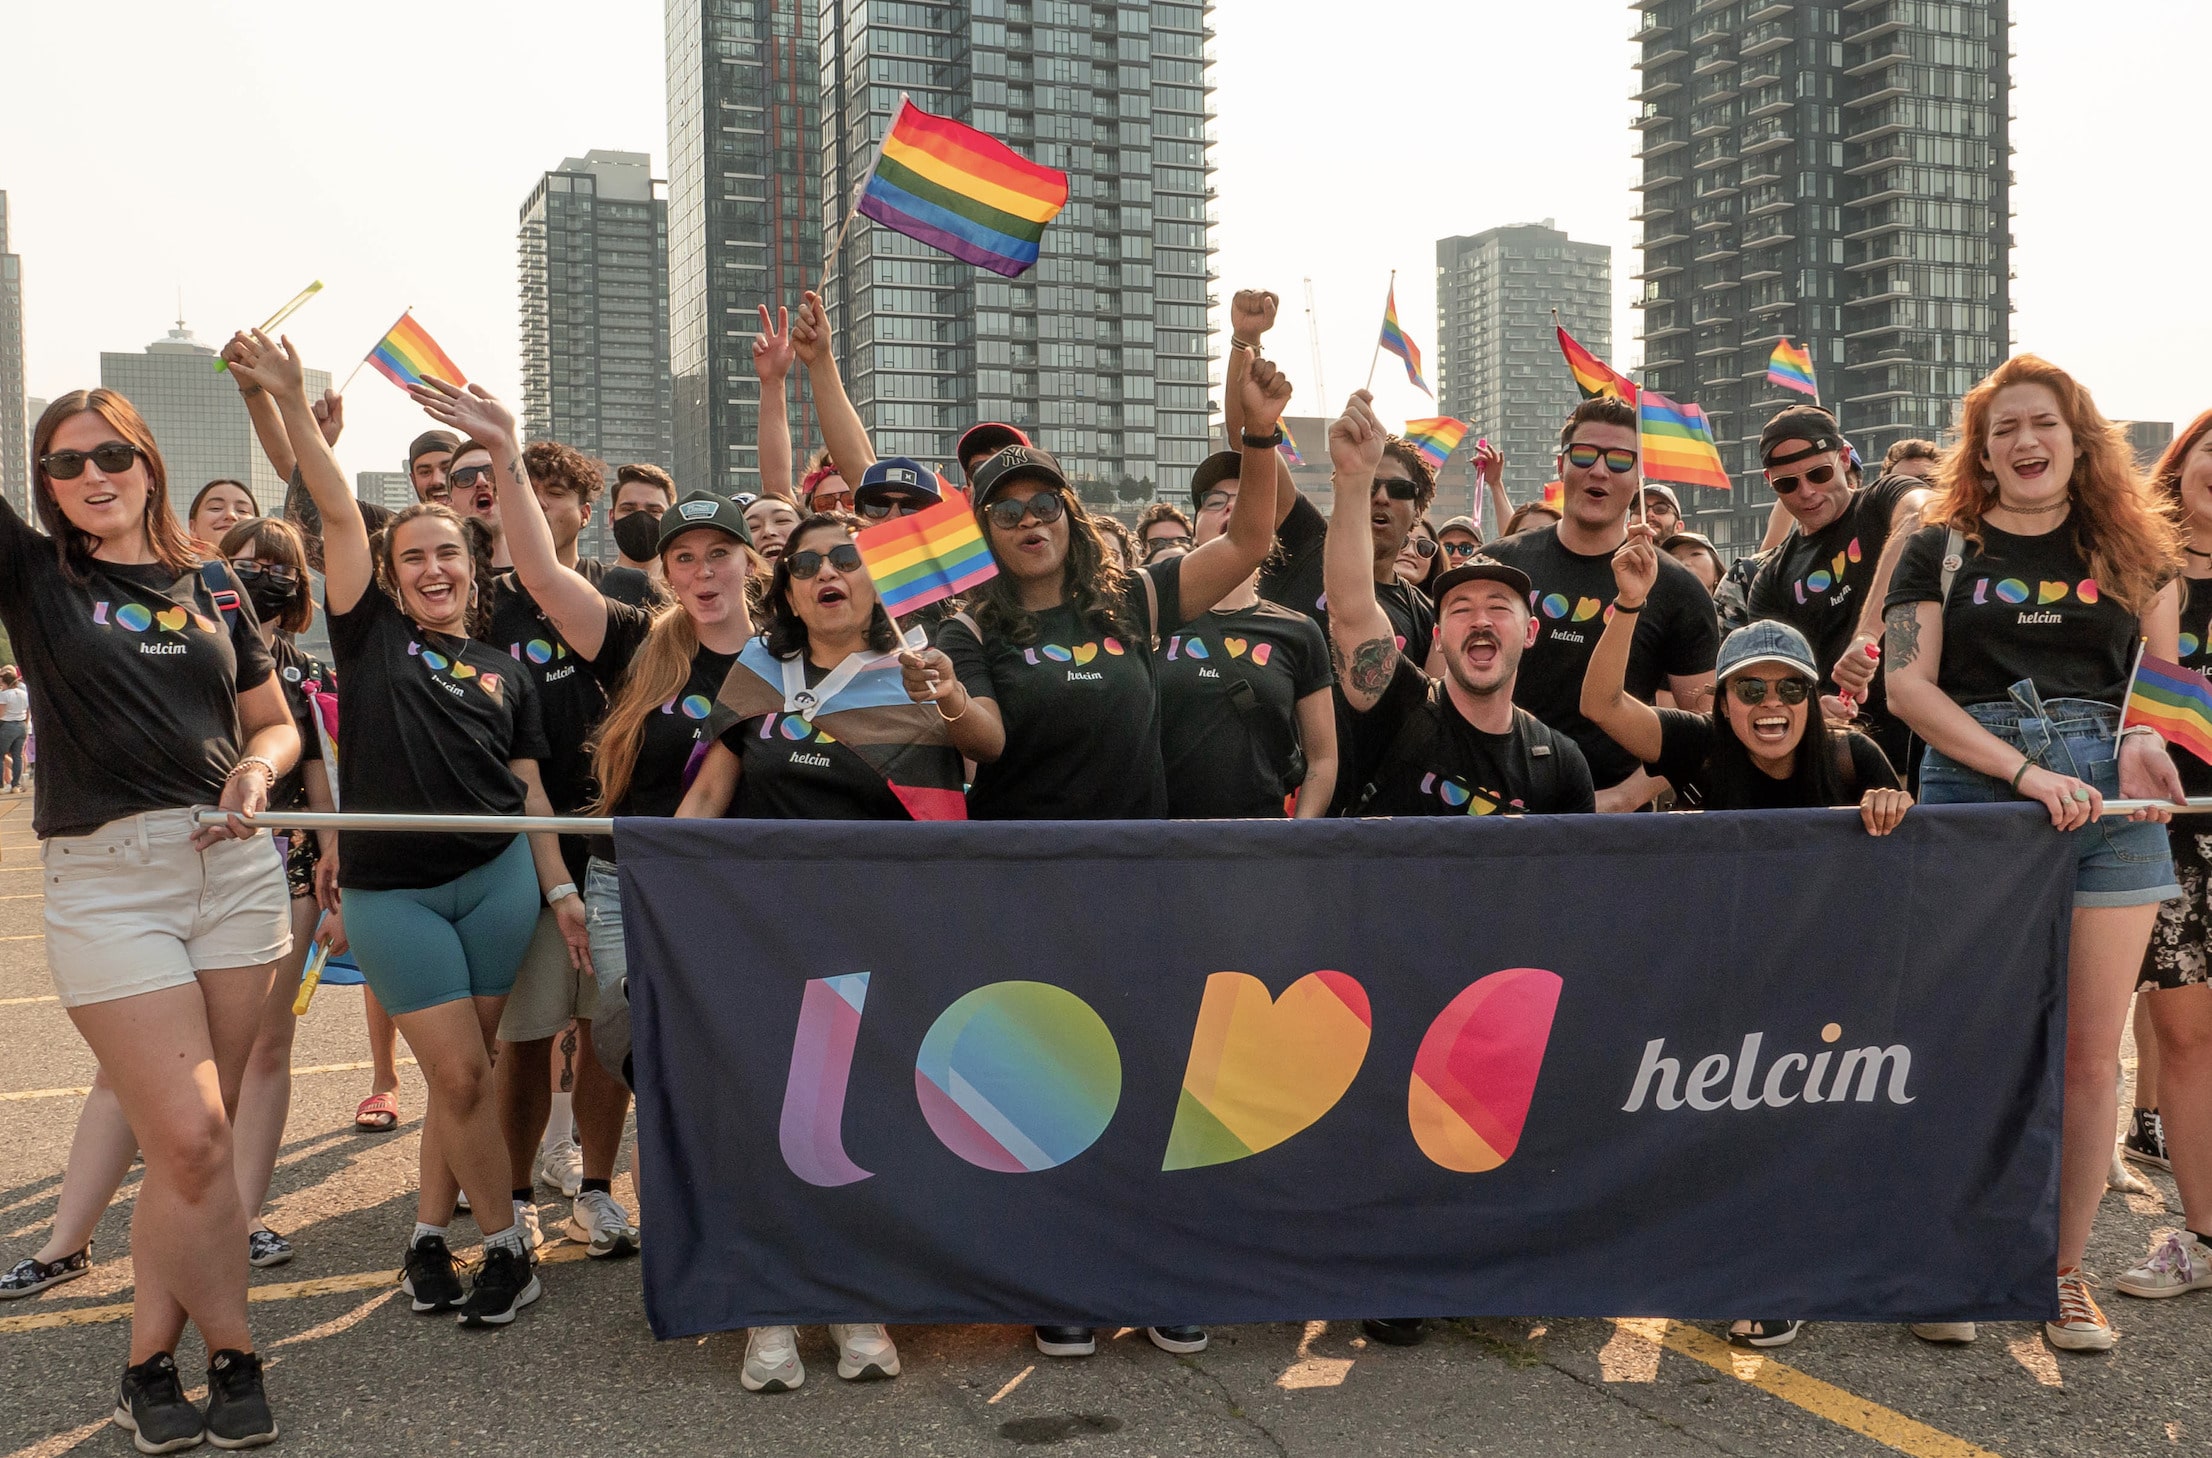 Helcim team members at 2022 Pride Parade posing for a photo with Helcim "love" Banner